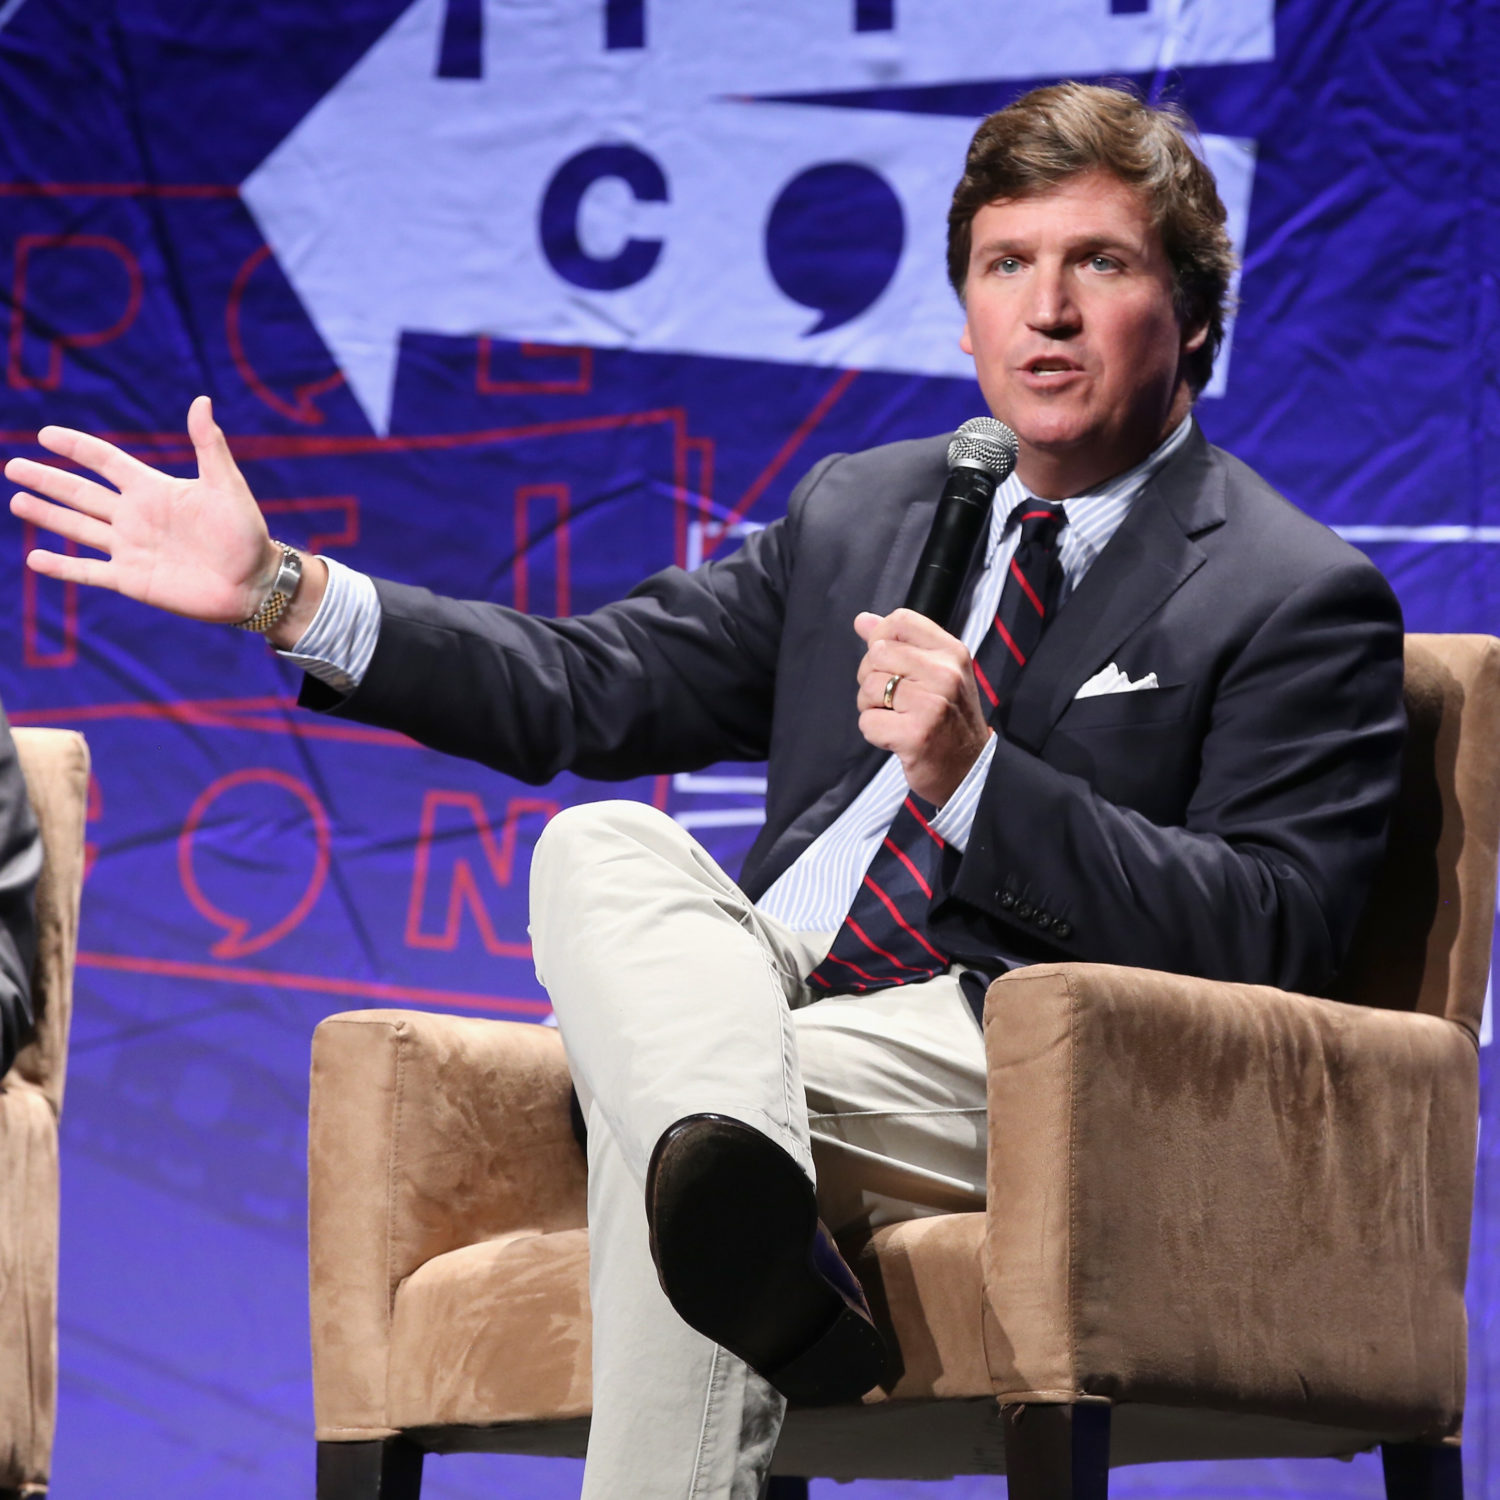 LOS ANGELES, CA - OCTOBER 21: Tucker Carlson speaks onstage during Politicon 2018 at Los Angeles Convention Center on October 21, 2018 in Los Angeles, California. (Photo by Phillip Faraone/Getty Images for Politicon )